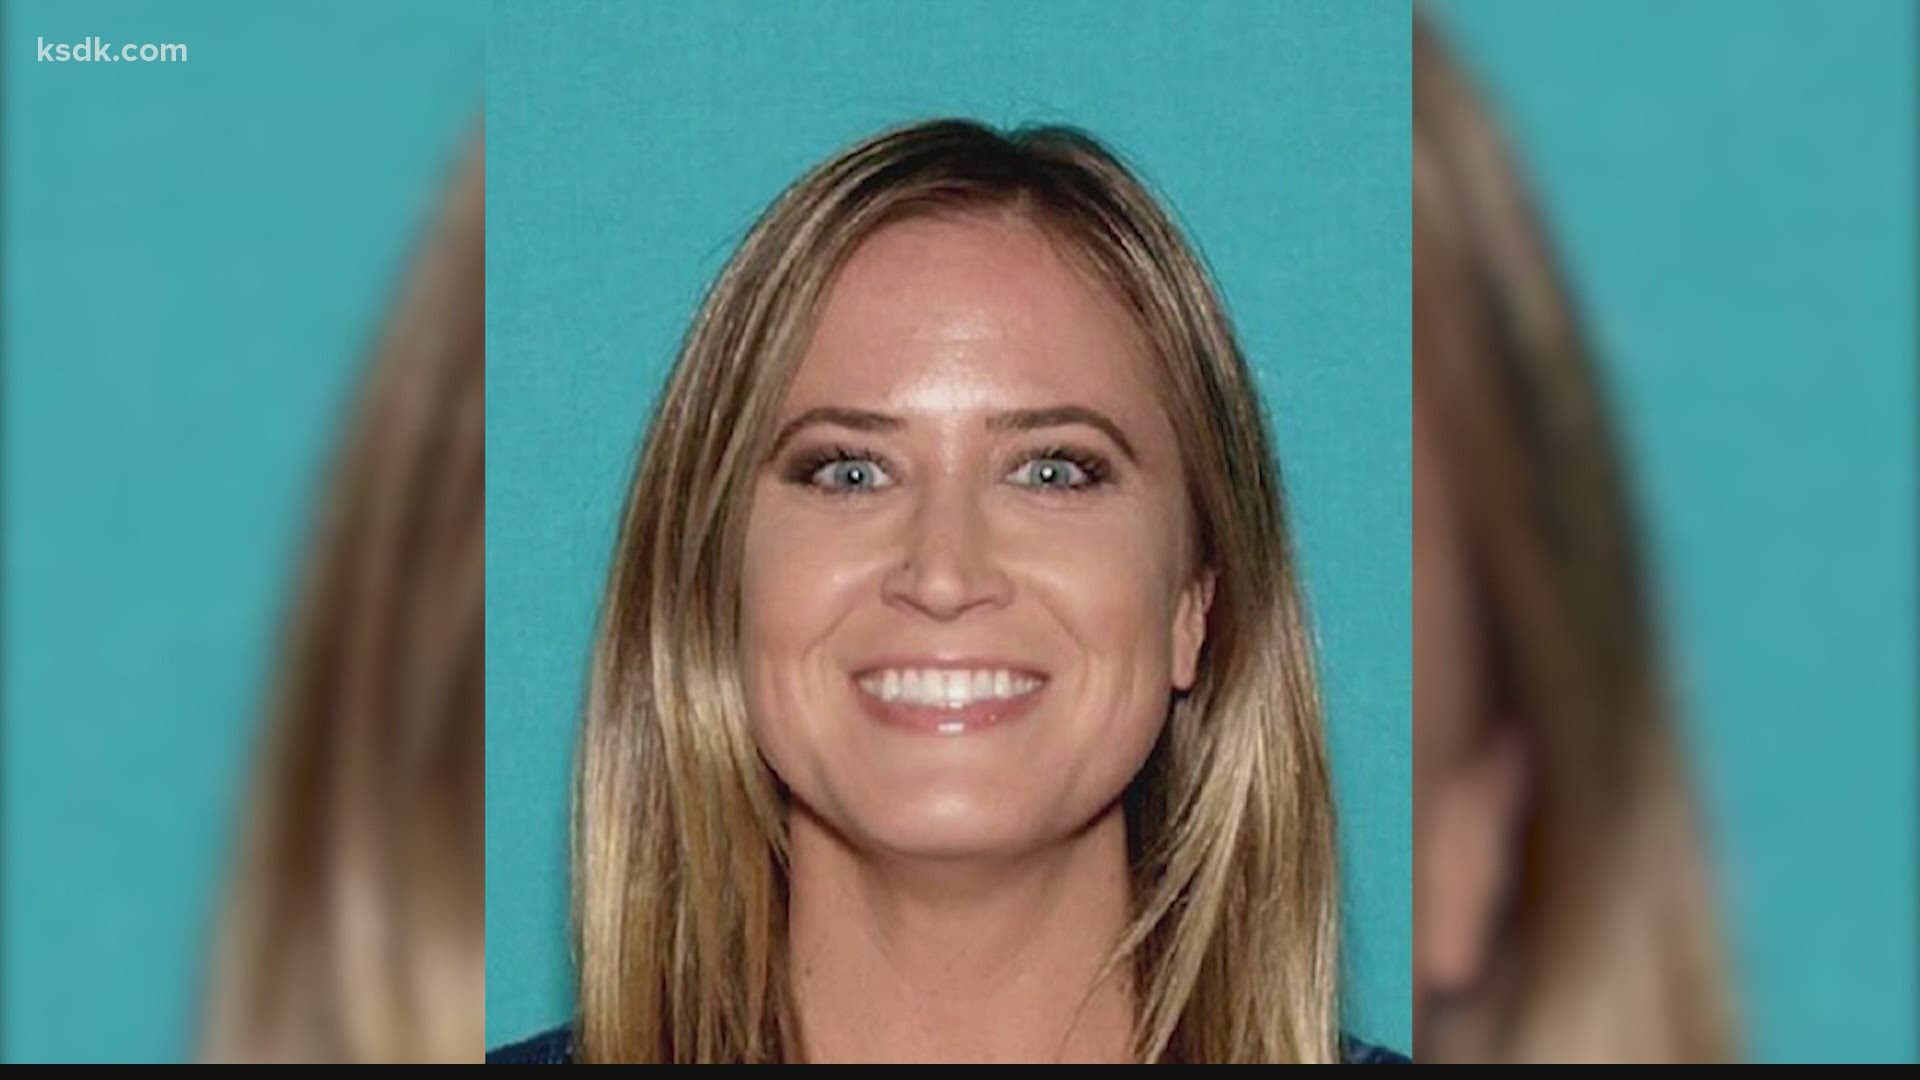 Park officials say a rescue crew found Holly Suzanne Courtier yesterday after receiving a tip that she was seen in the park.